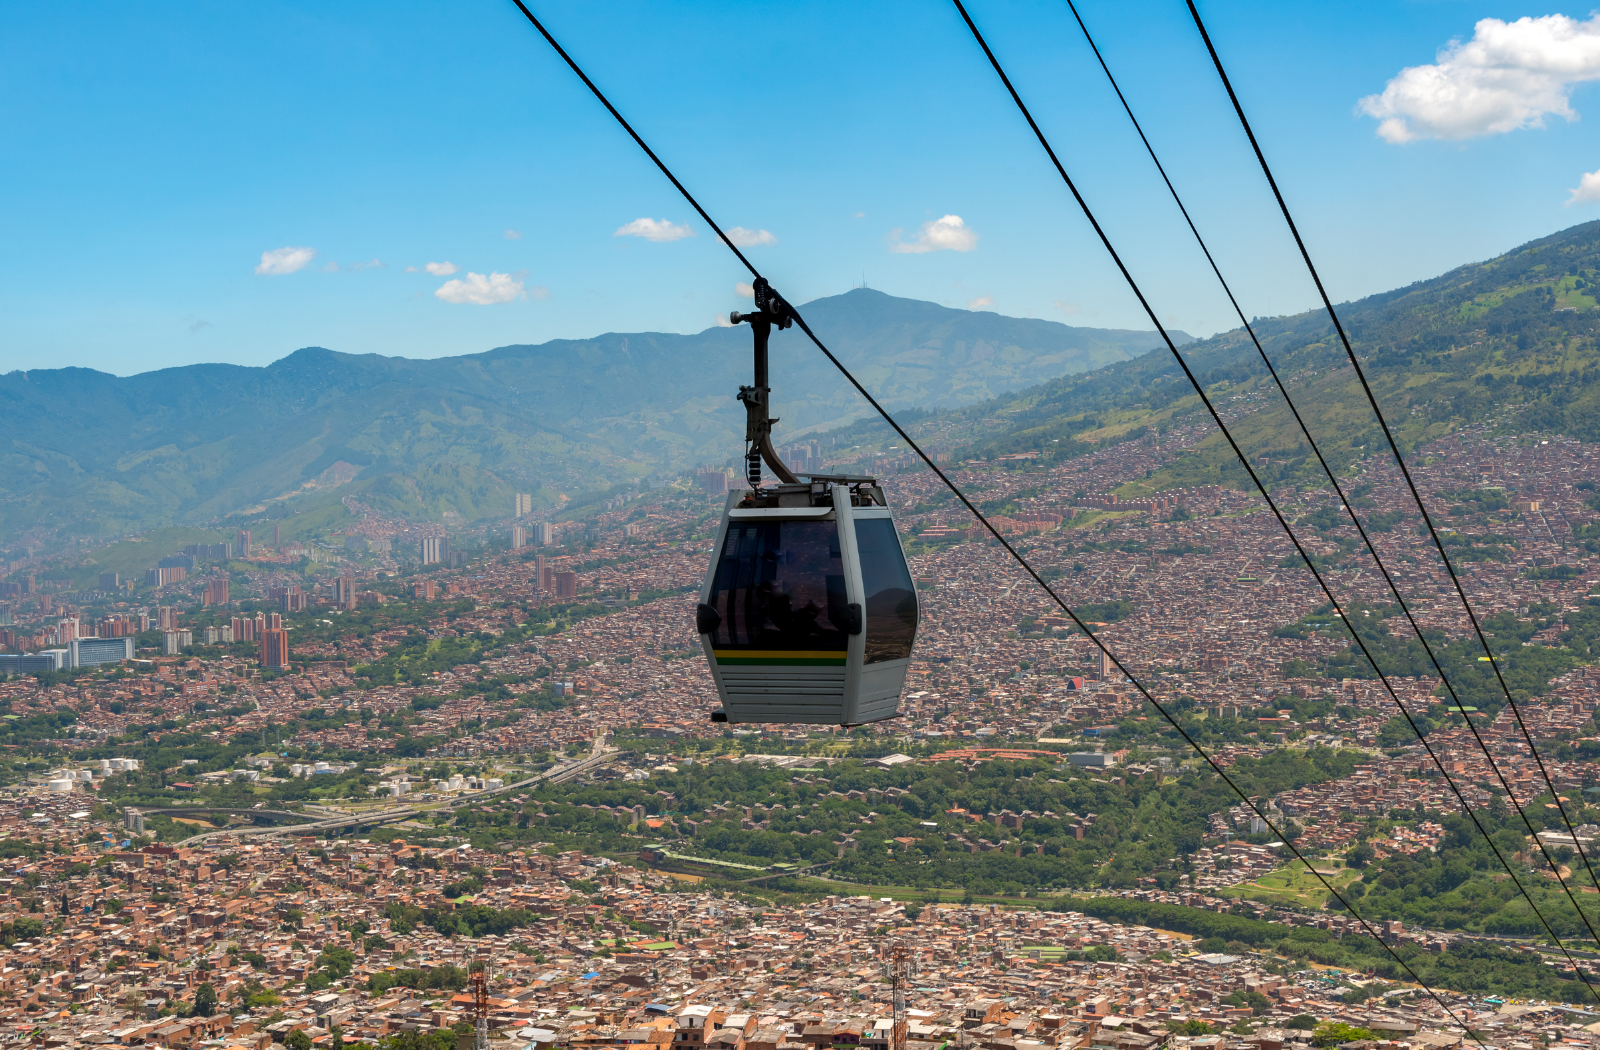 The Cabelway in Medellin, Colombia